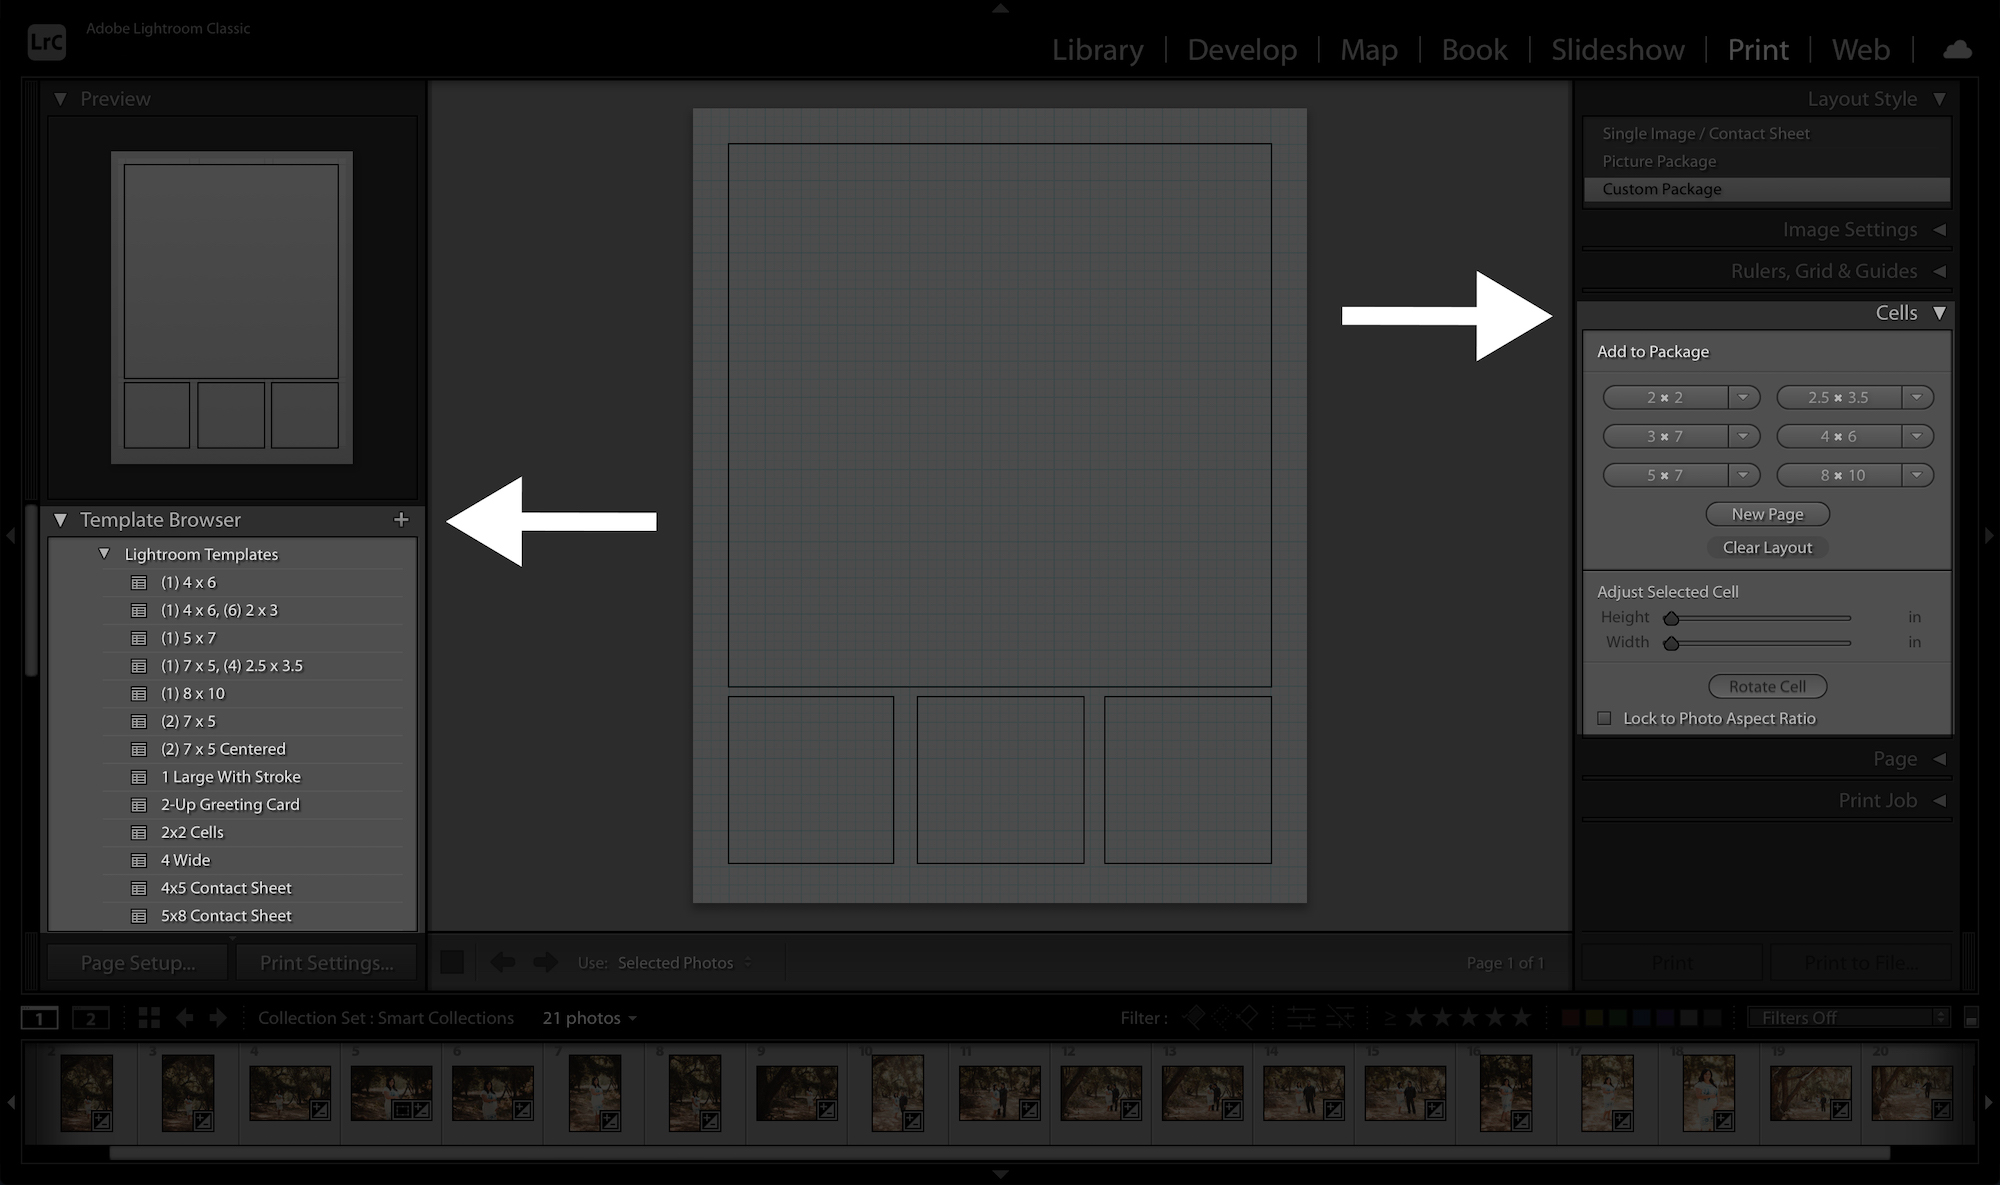 create and use lightroom templates in lightroom cells and template browser